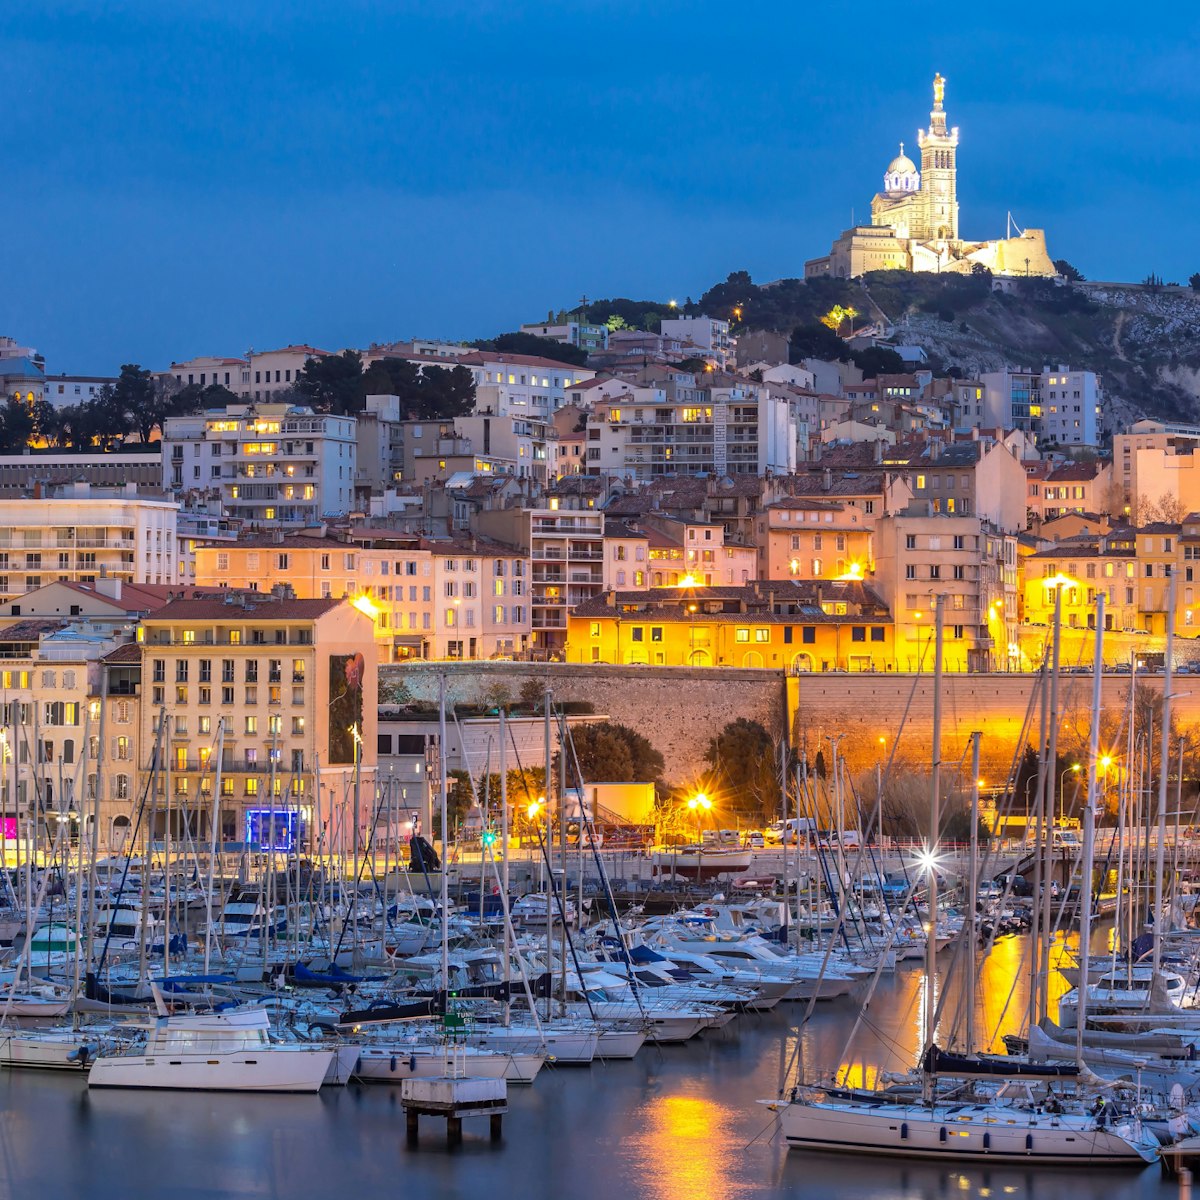 Marseille, France at night. The famous european harbour view on the Notre Dame de la Garde; Shutterstock ID 422043877; Your name (First / Last): redownload; GL account no.: redownload; Netsuite department name: redownload; Full Product or Project name including edition: redownload